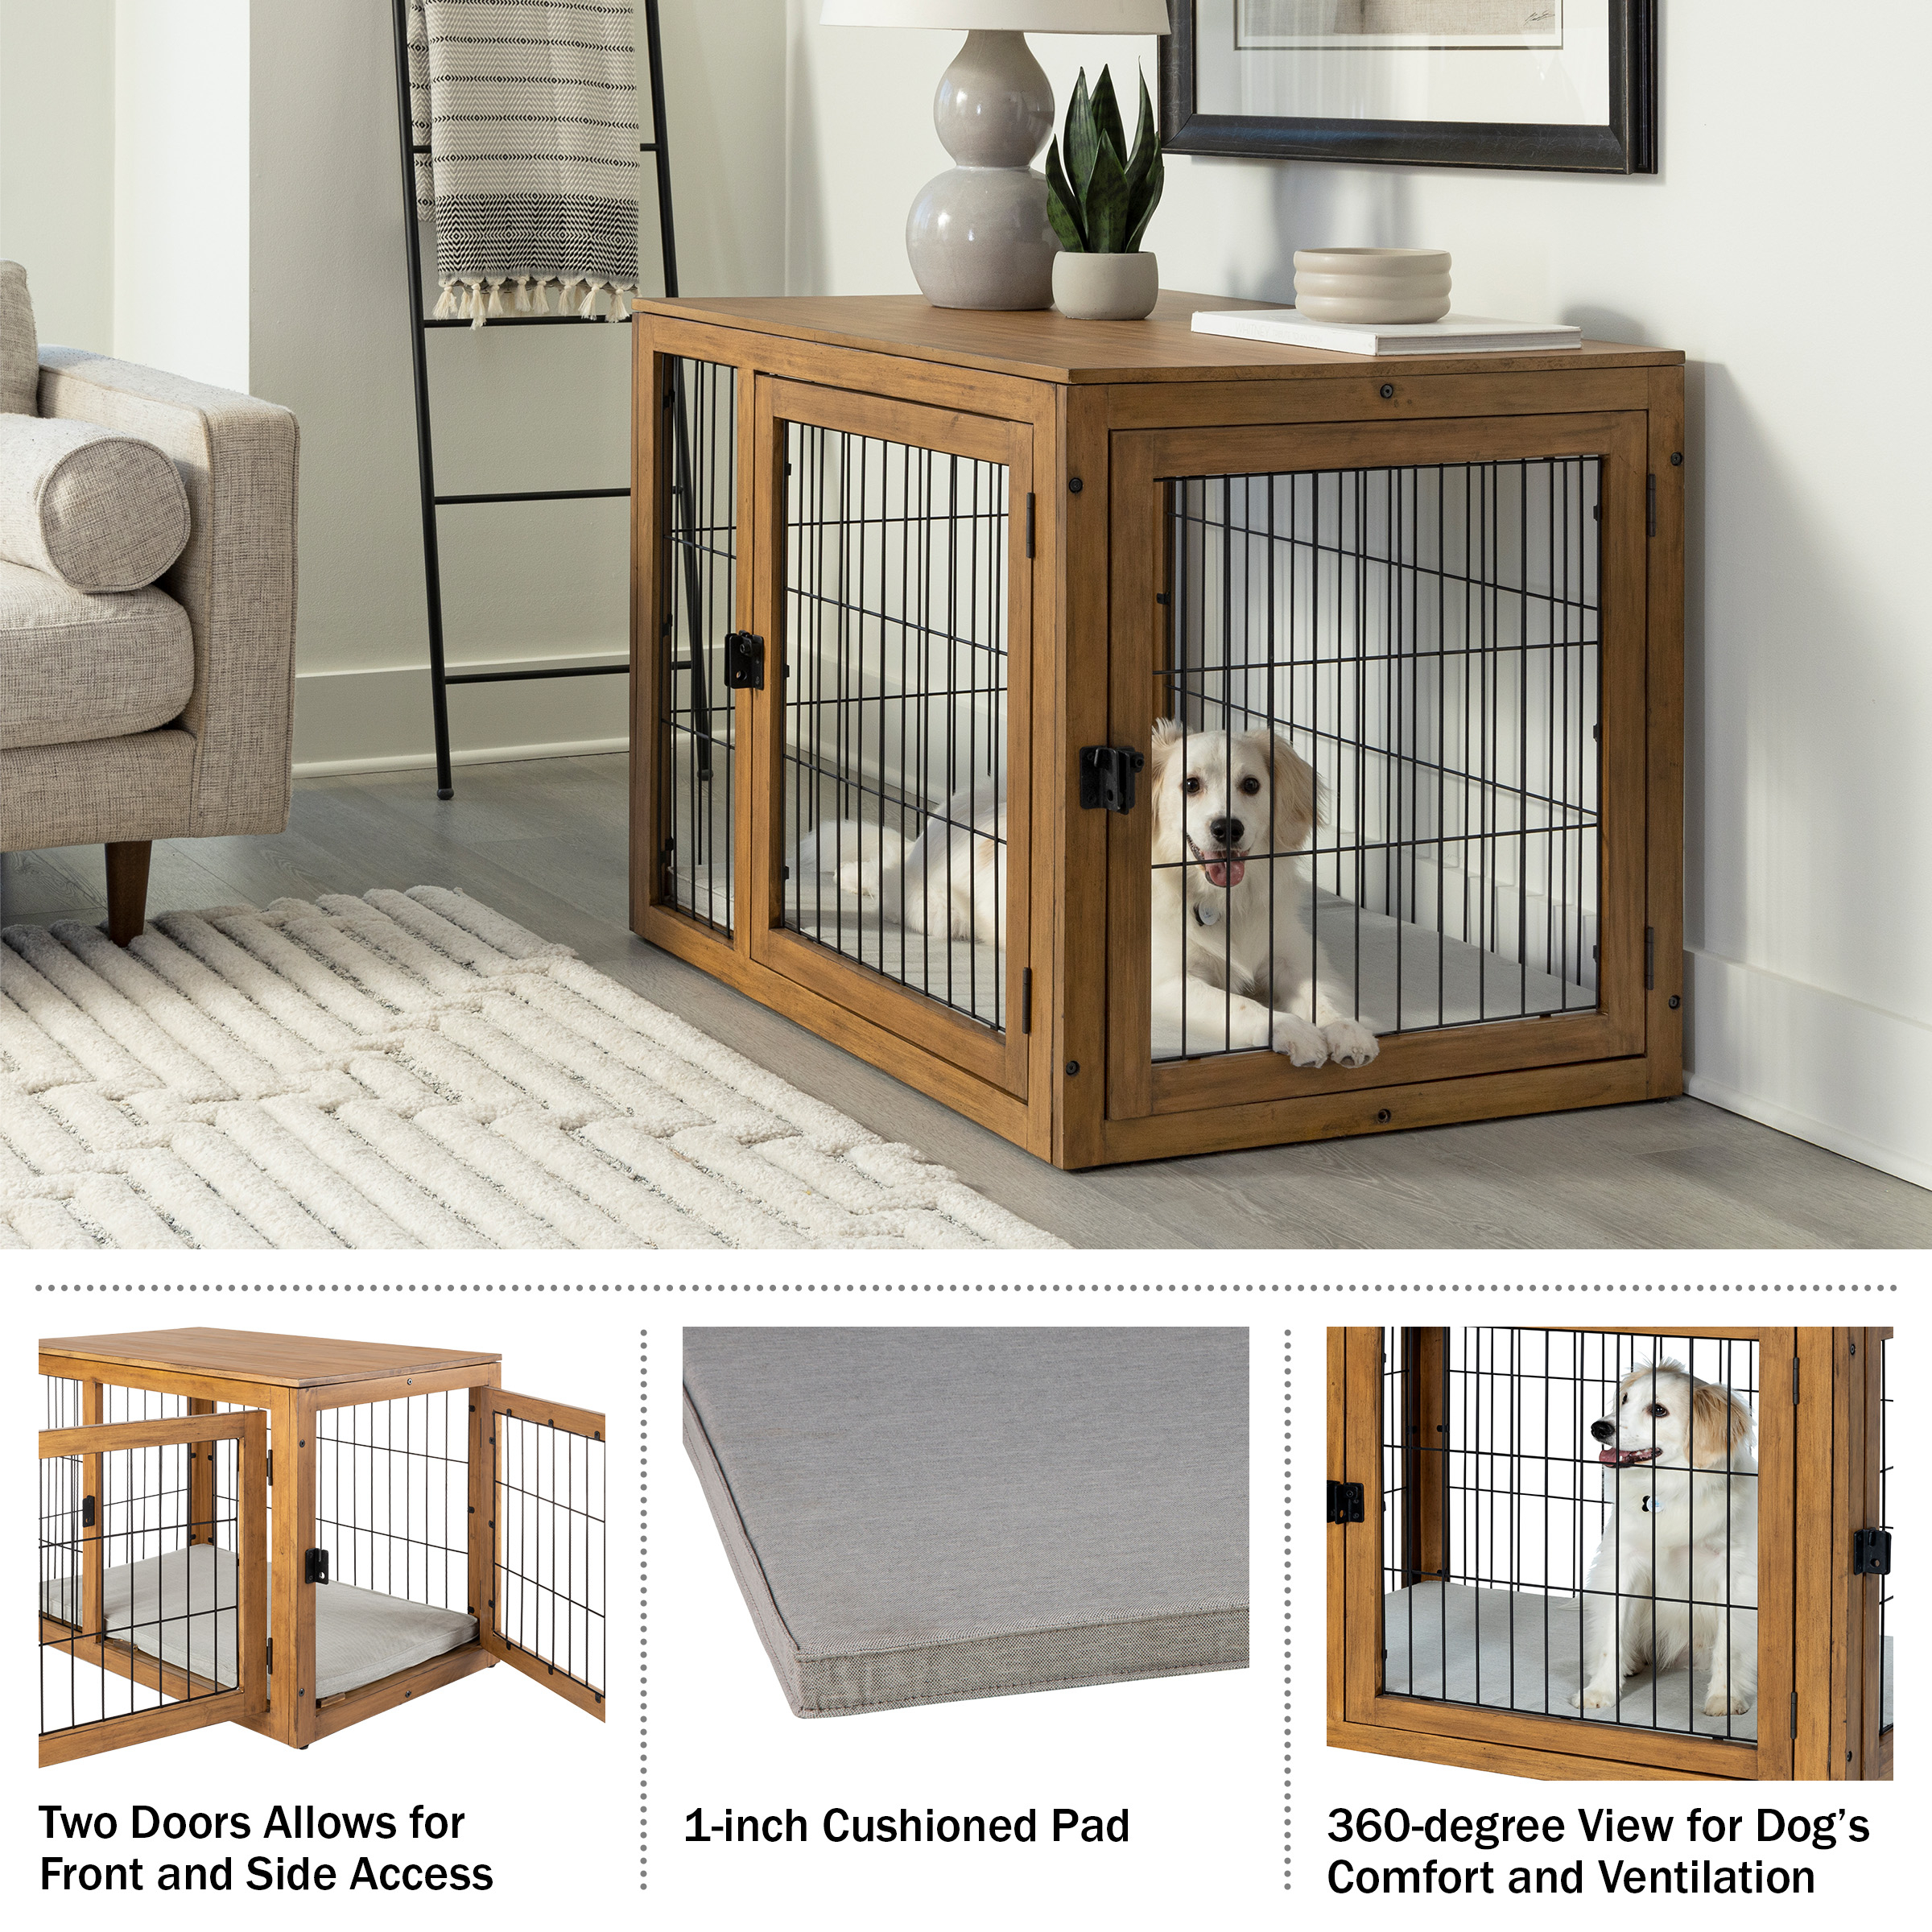 Furniture-Style Dog Crate - Acacia Wood Kennel For Large Dogs With Double Doors And Cushion - Dog Kennel Furniture By PETMAKER (Natural)